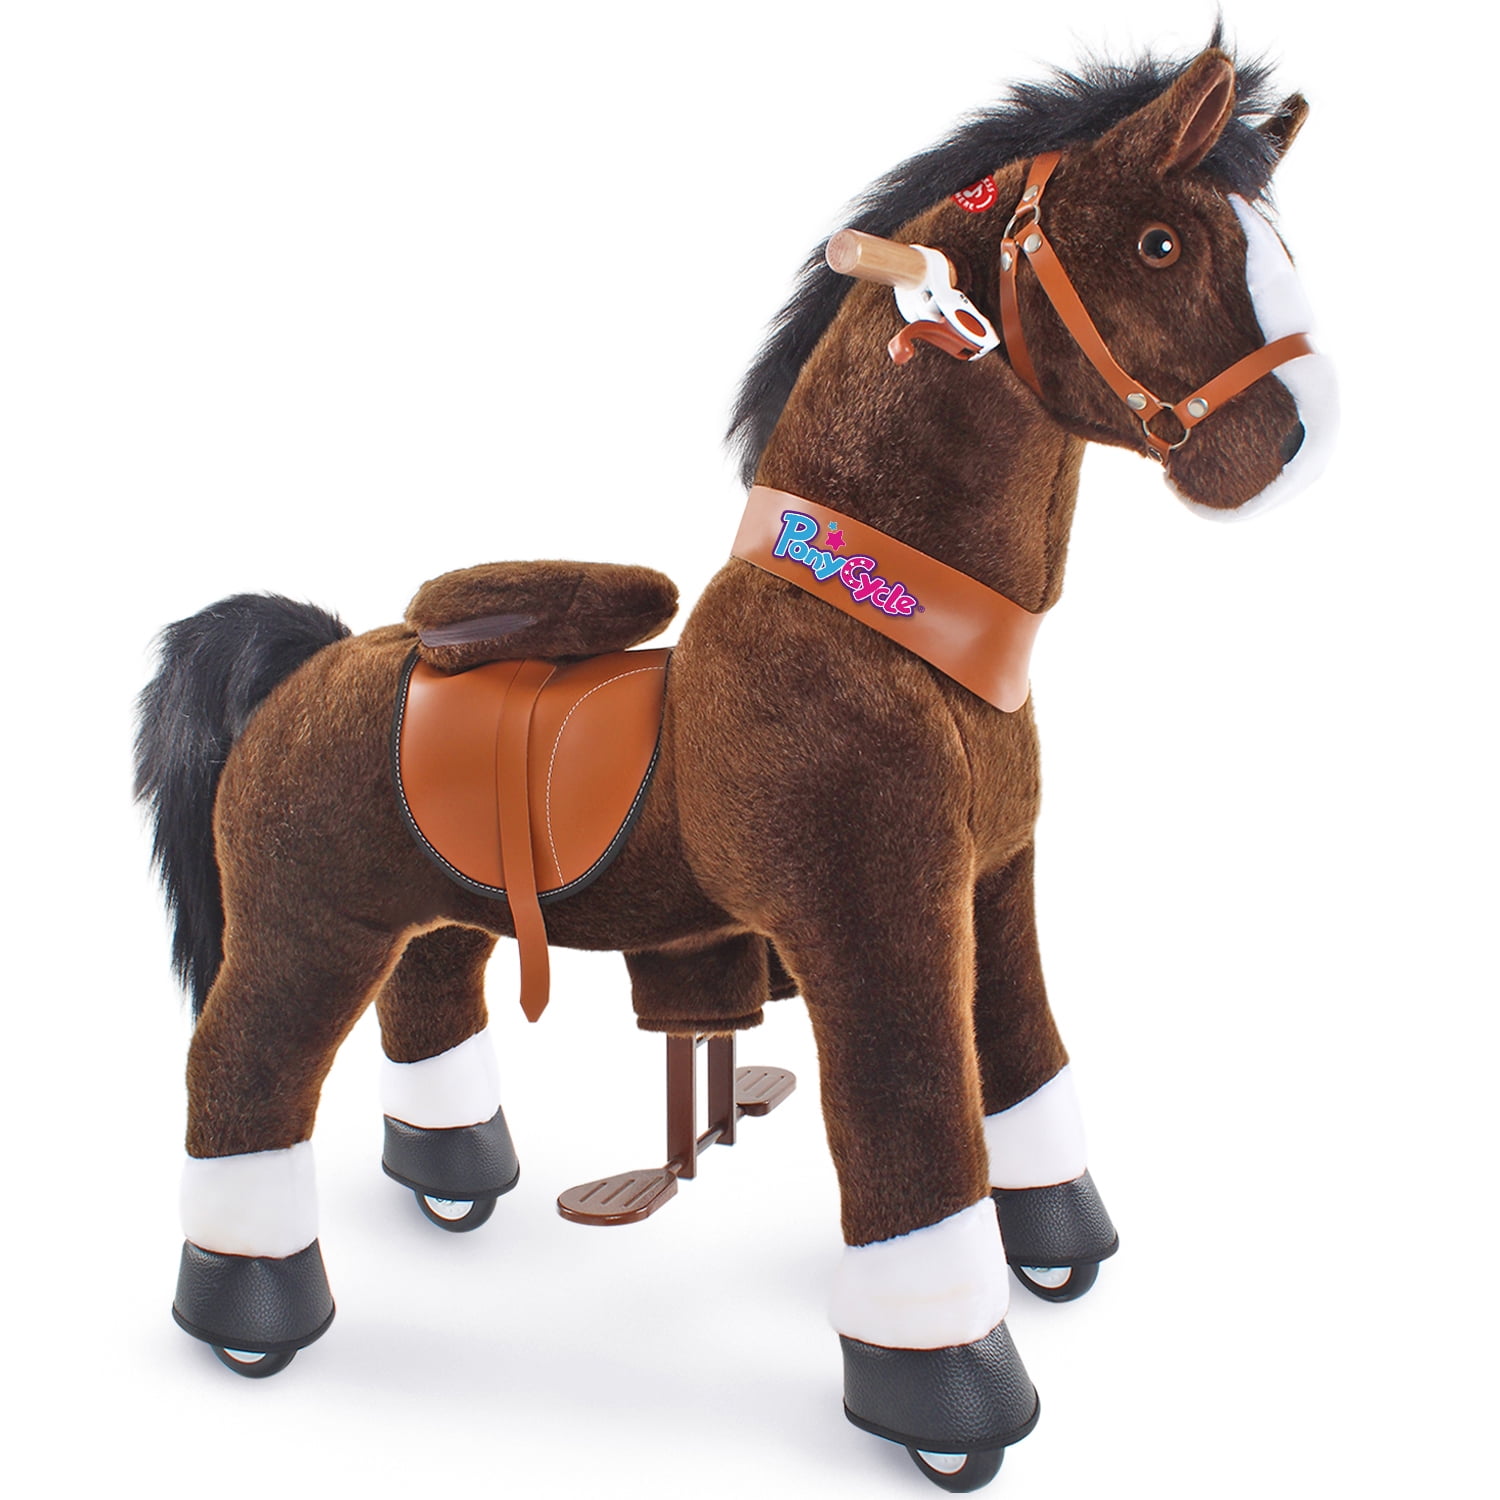 Details about   Kids Ride on Walking Horse Foot Pedal Rolling Plush Pony Toy W/ Wheels Chocolate 